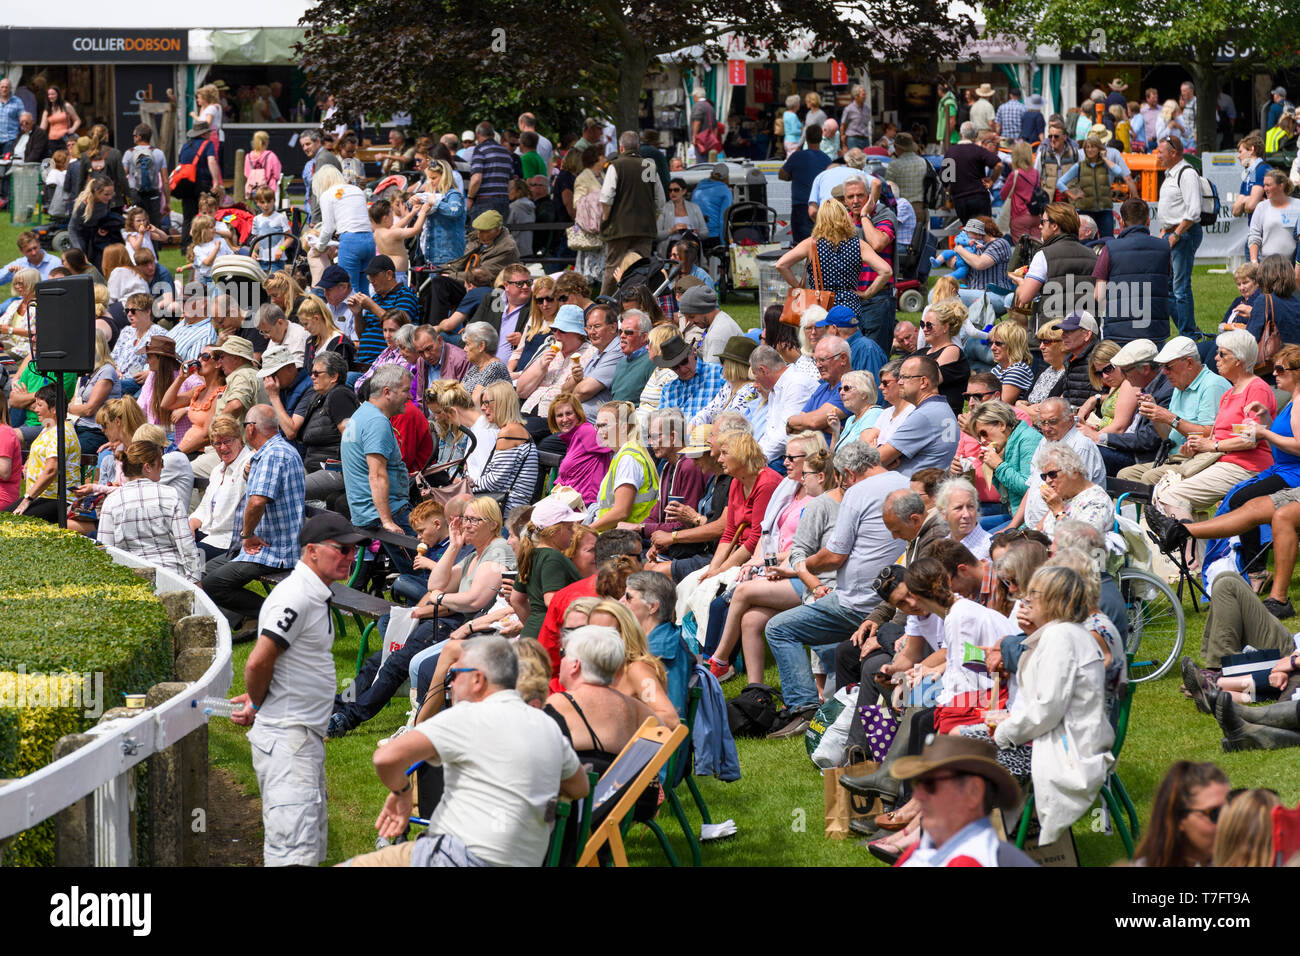 Large crowd of people spectating, gathered around main arena relaxing, sitting in sun, watching event - Great Yorkshire Show, Harrogate, England, UK. Stock Photo